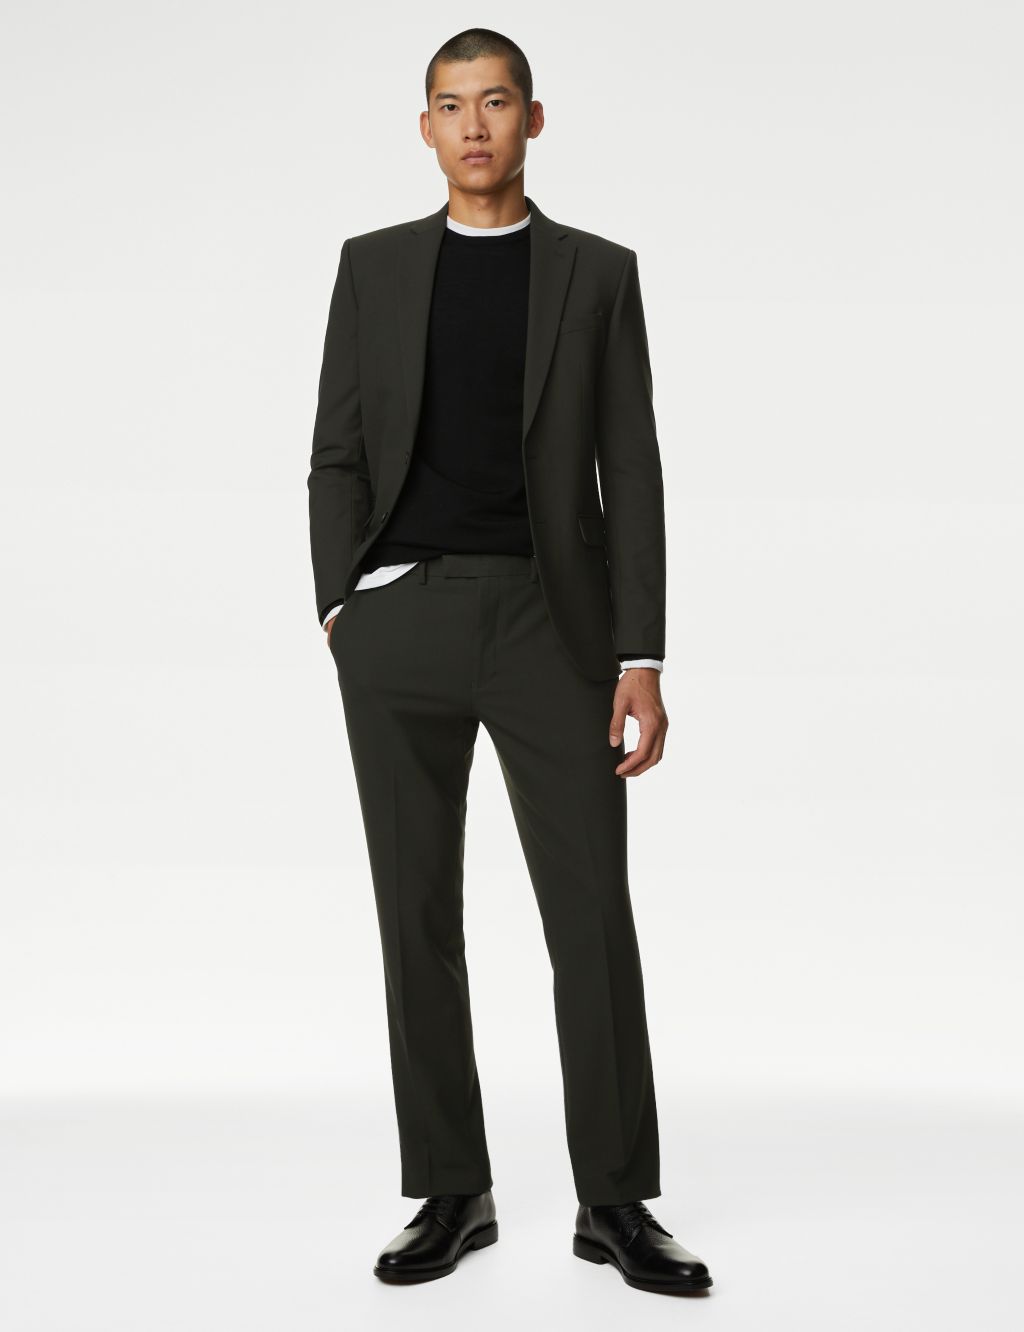 Slim Fit Stretch Suit Trousers image 1